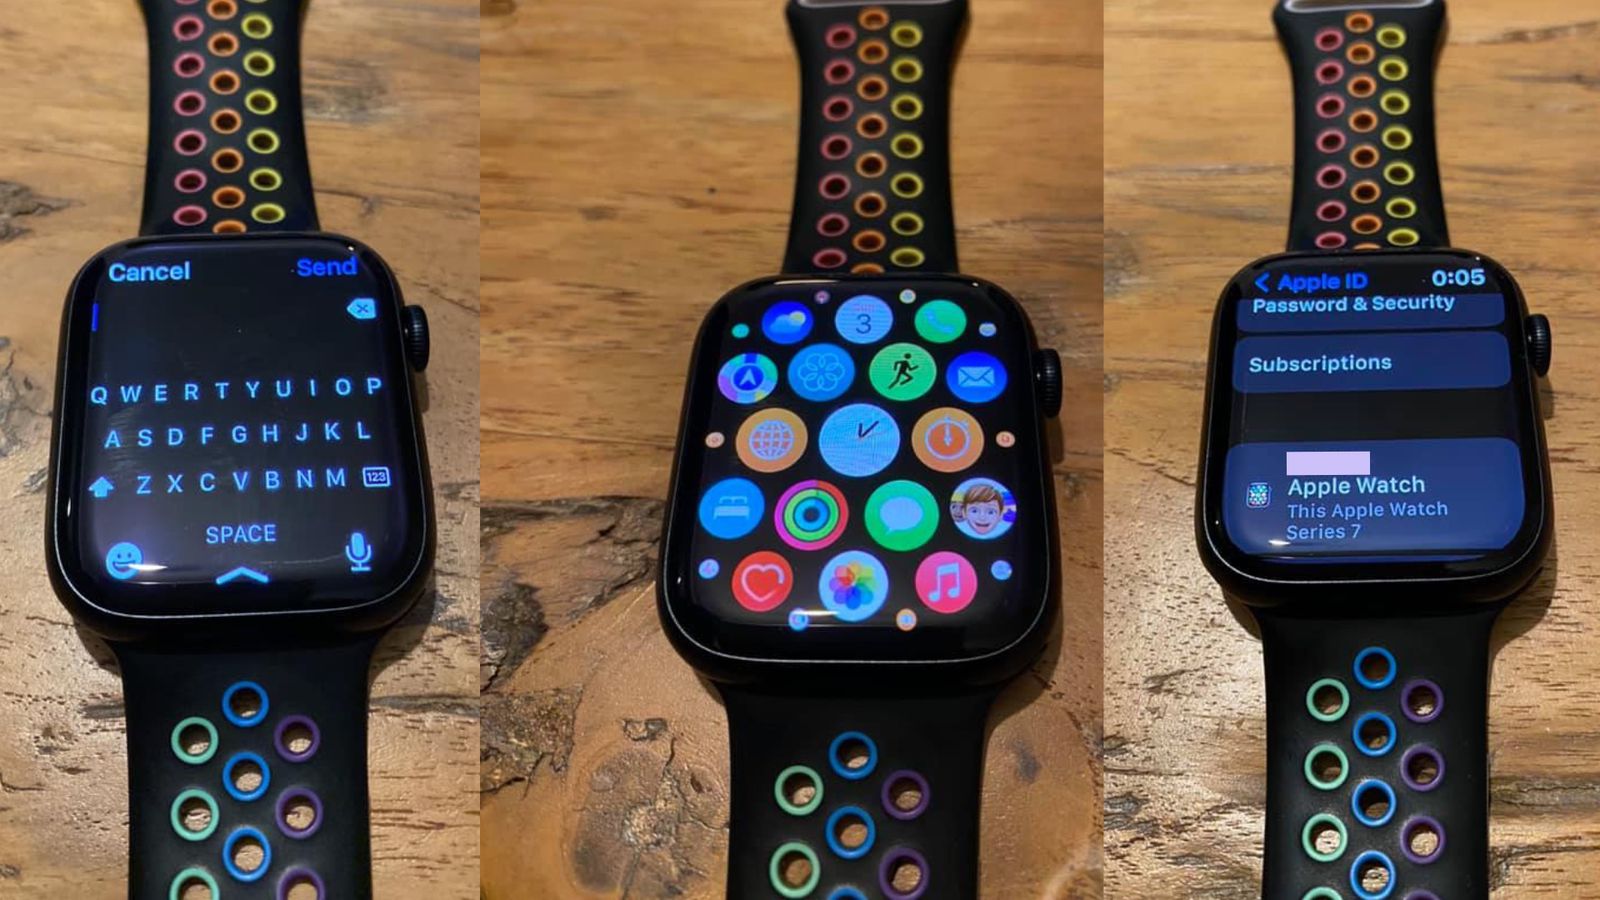 Live photos of the Apple Watch Series 7 have surfaced online, the smartwatch will indeed get a display with very thin bezels